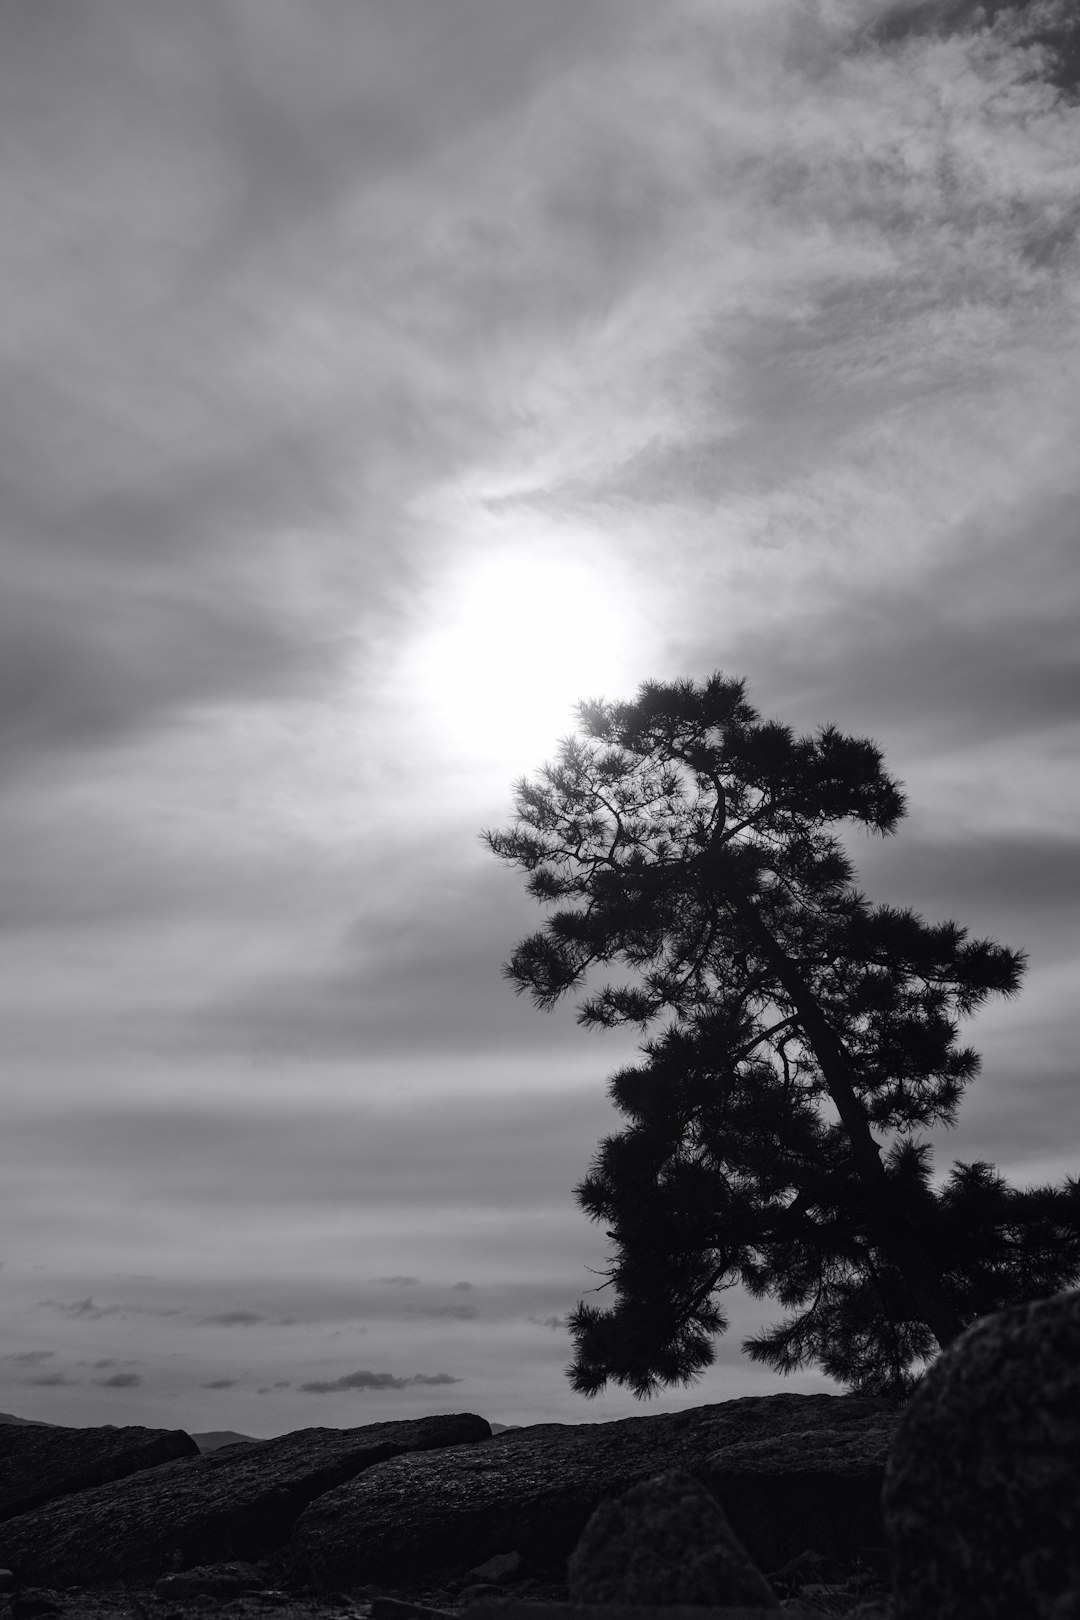 grayscale photo of tree under cloudy sky